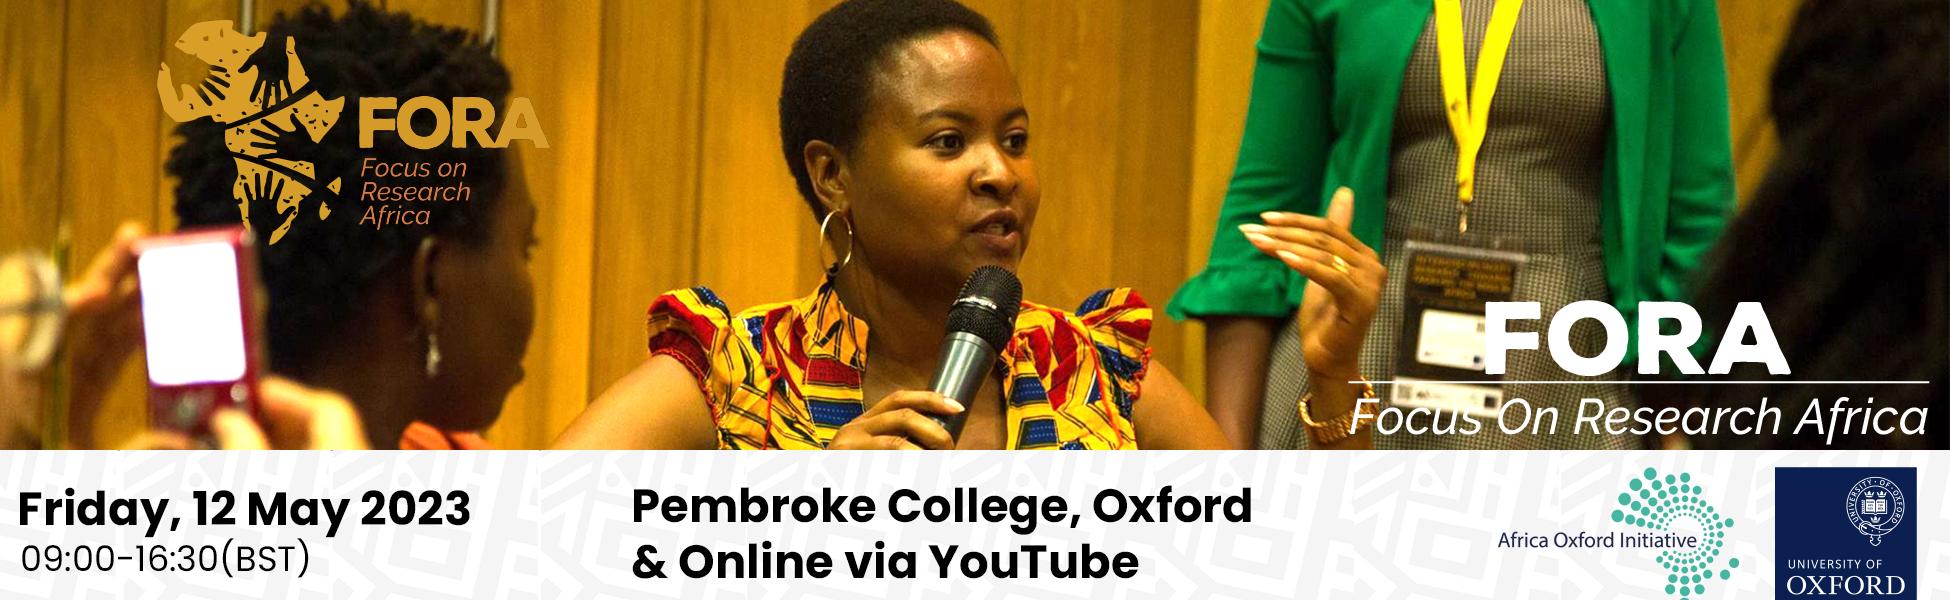 An image with text 'Focus on Research Africa, Pembroke College, and online via YouTube' 